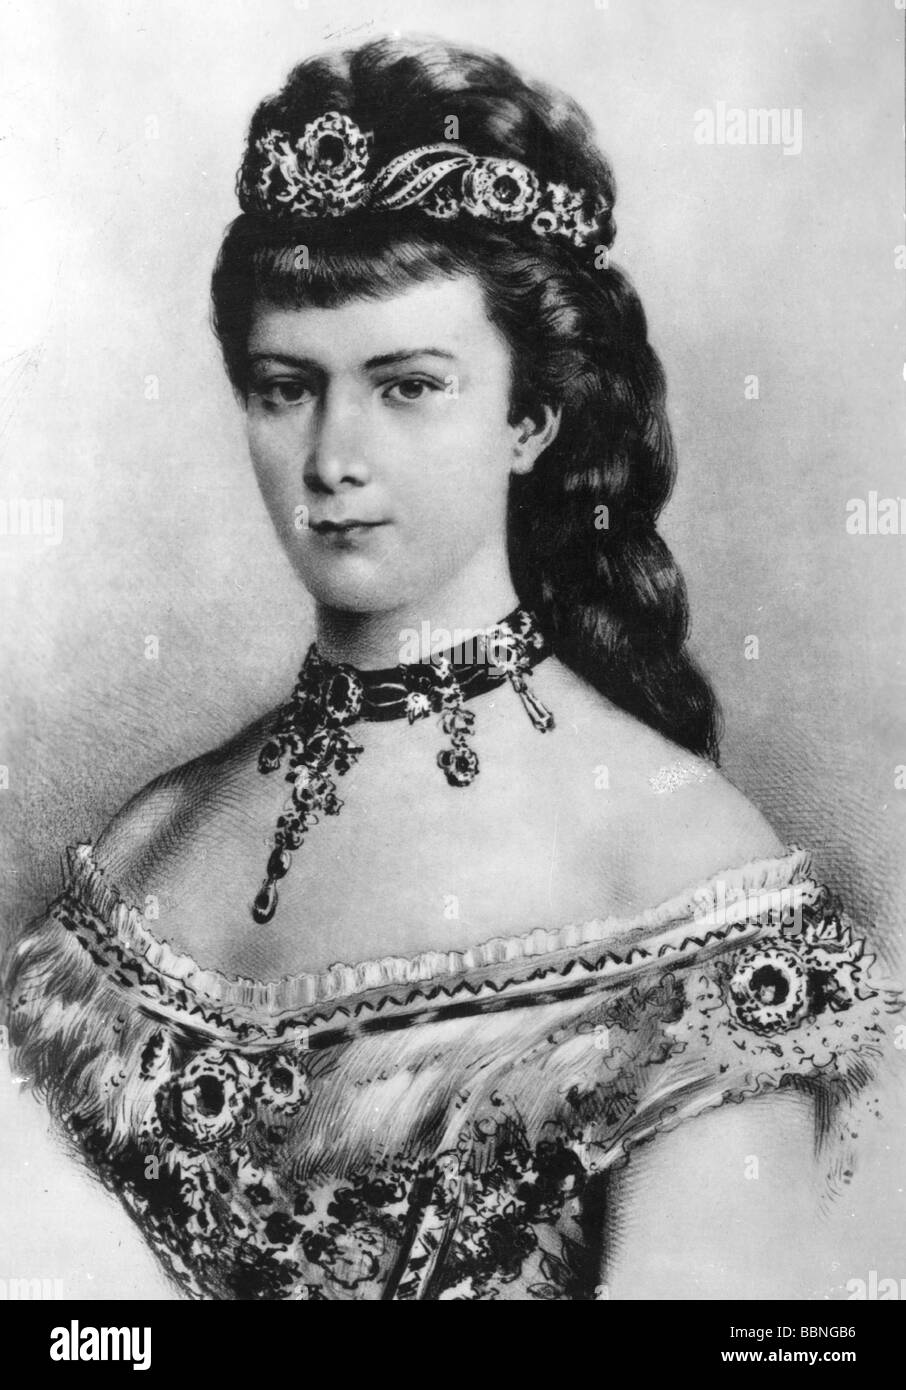 Elisabeth Amalie of Bavaria, 24.12.1837 - 10.9.1898, Empress consort of Austria since 24.4.1854, Queen consort of Hungary, called 'Sisi', portrait, 19th century, Stock Photo